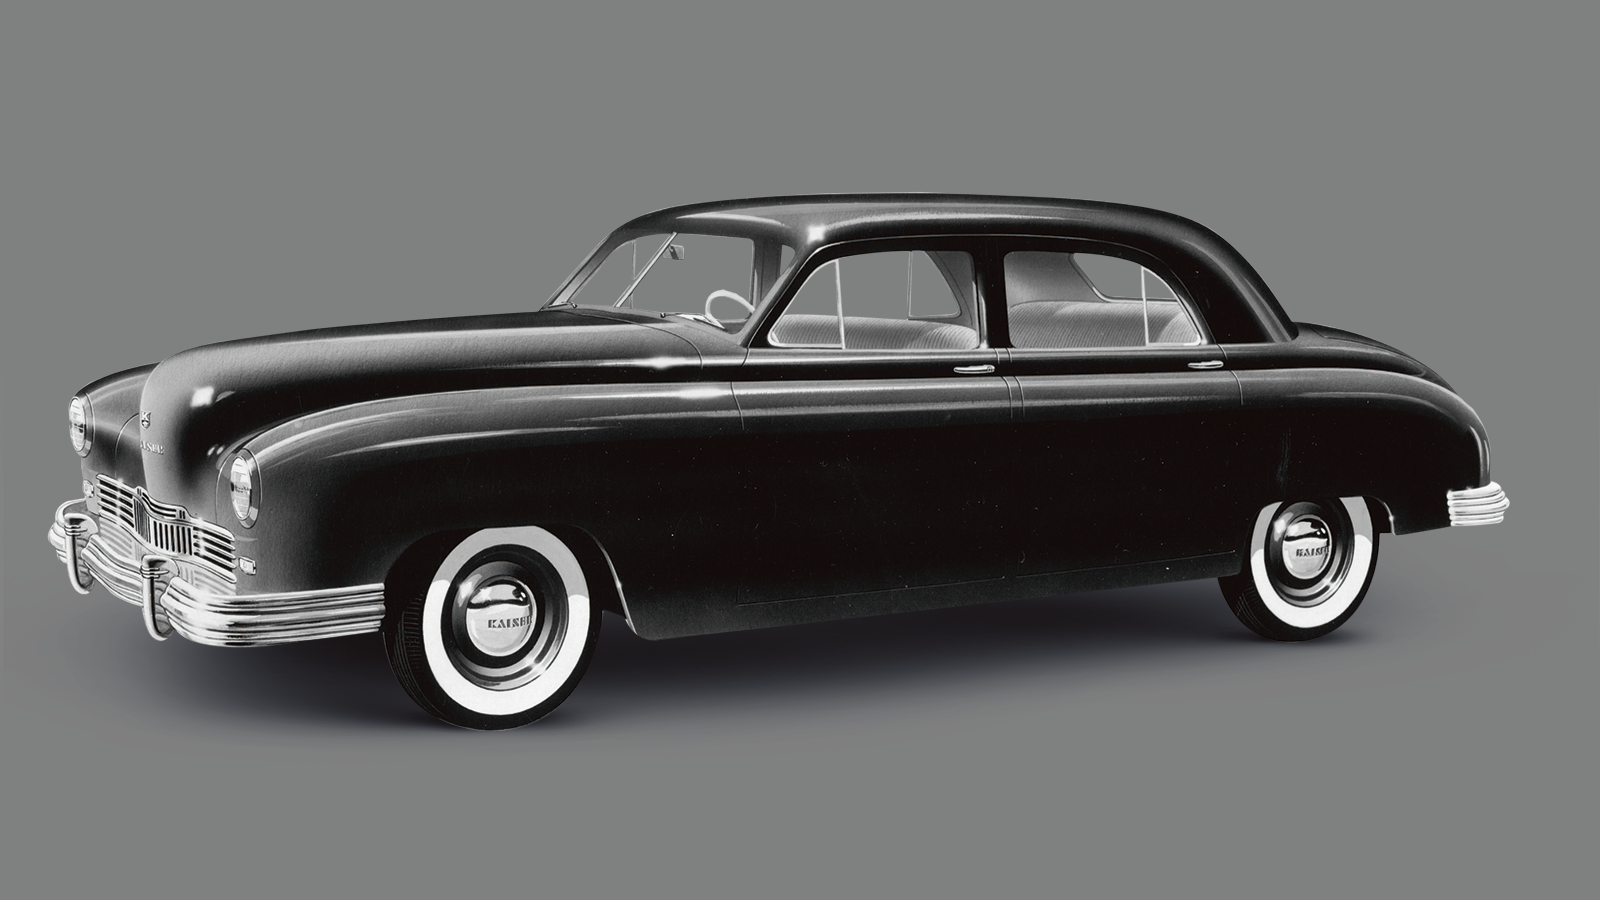 Ten classic car designs that were changed at the last minute